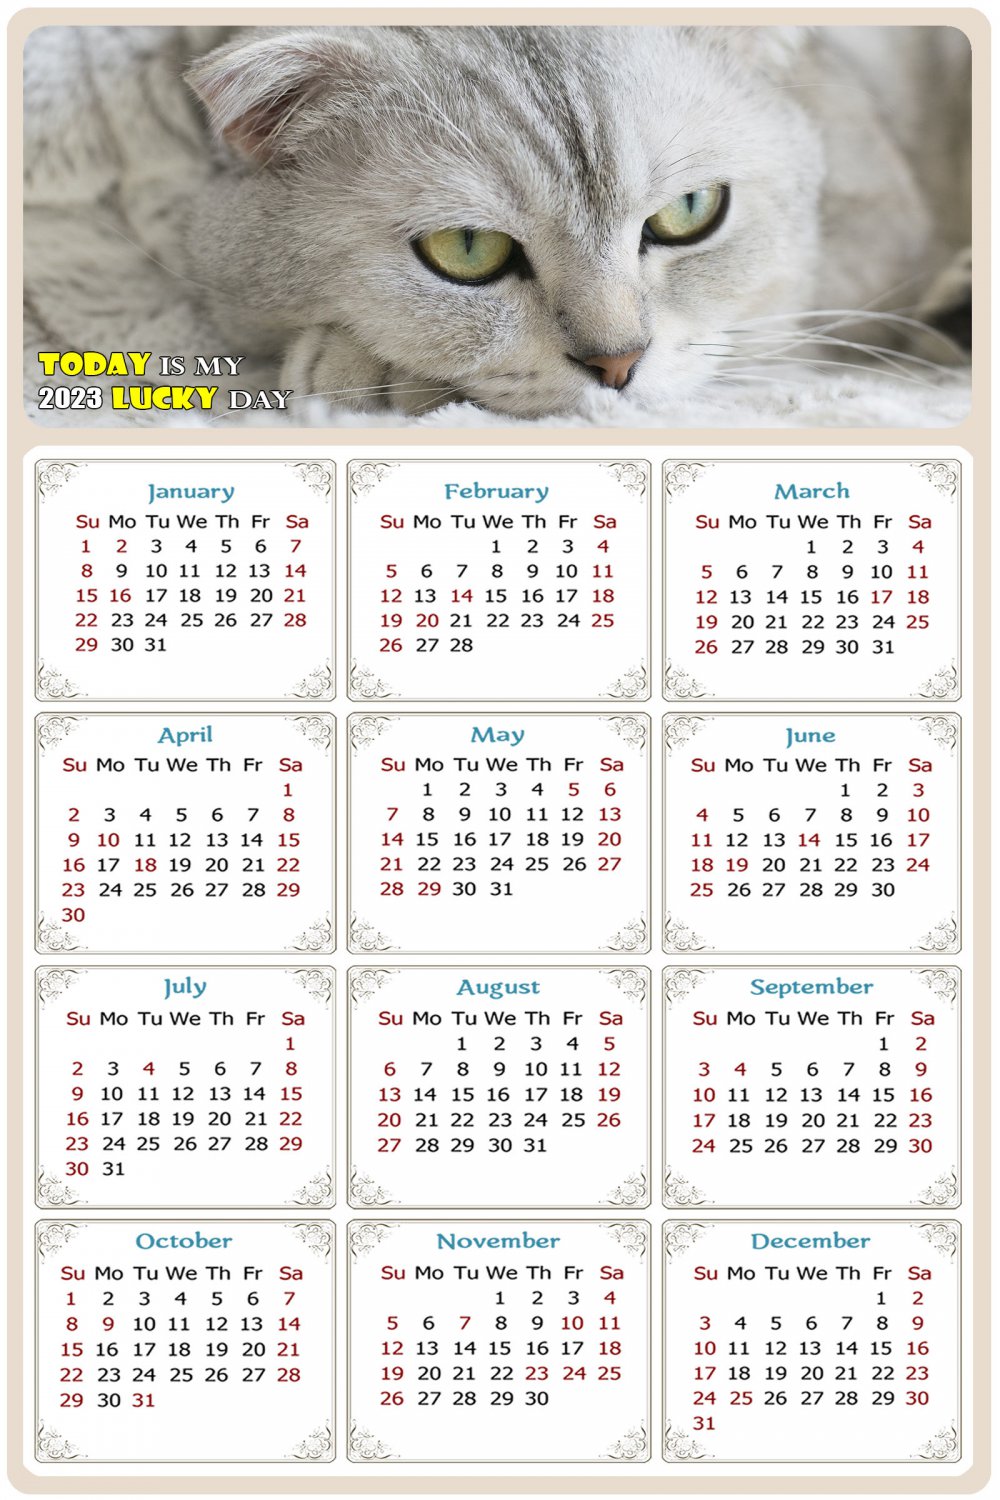 2022 Magnetic Calendar - Calendar Magnets - Today is My Lucky Day - Cat Themed 1 (5.25 x 8)